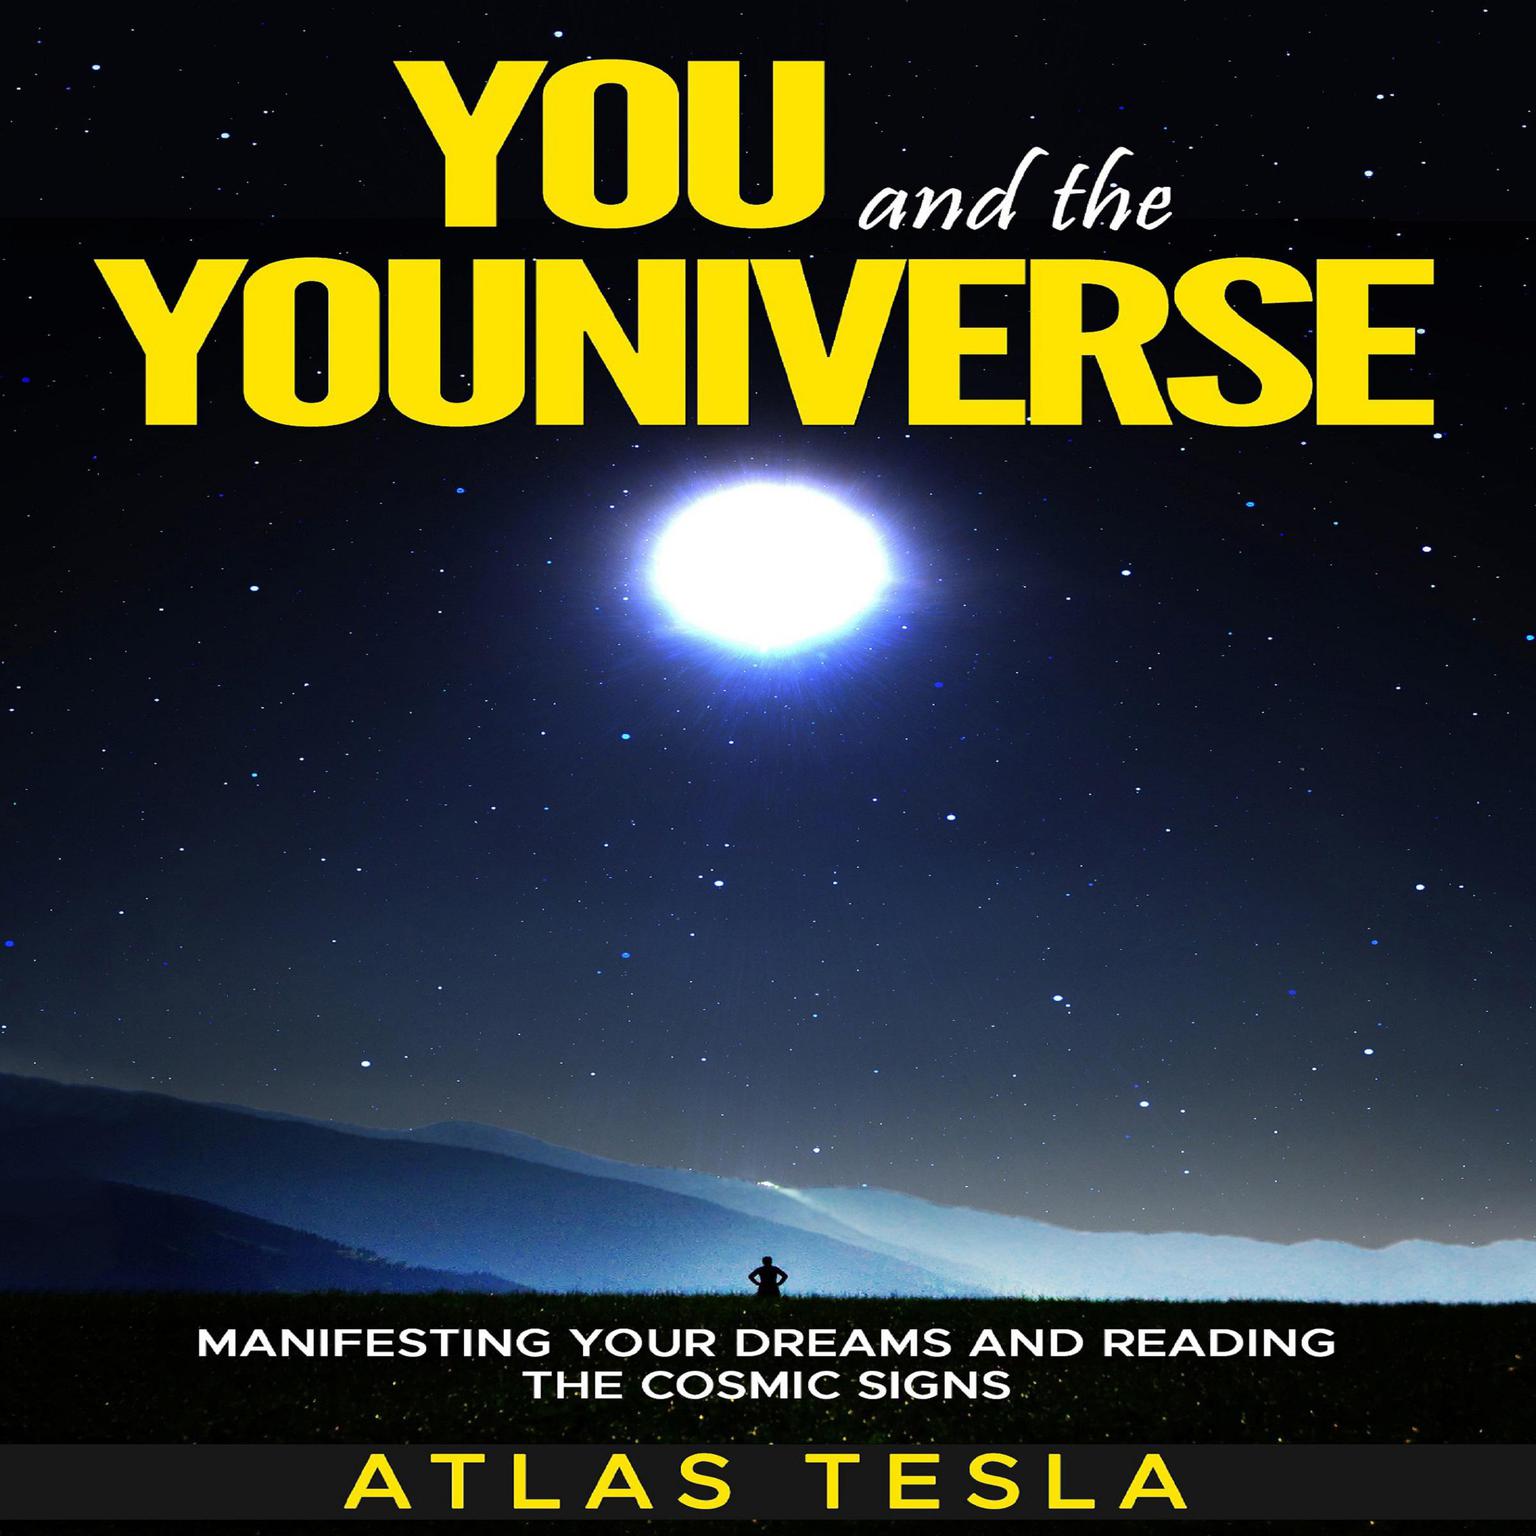 You and the Youniverse Audiobook, by Atlas Tesla